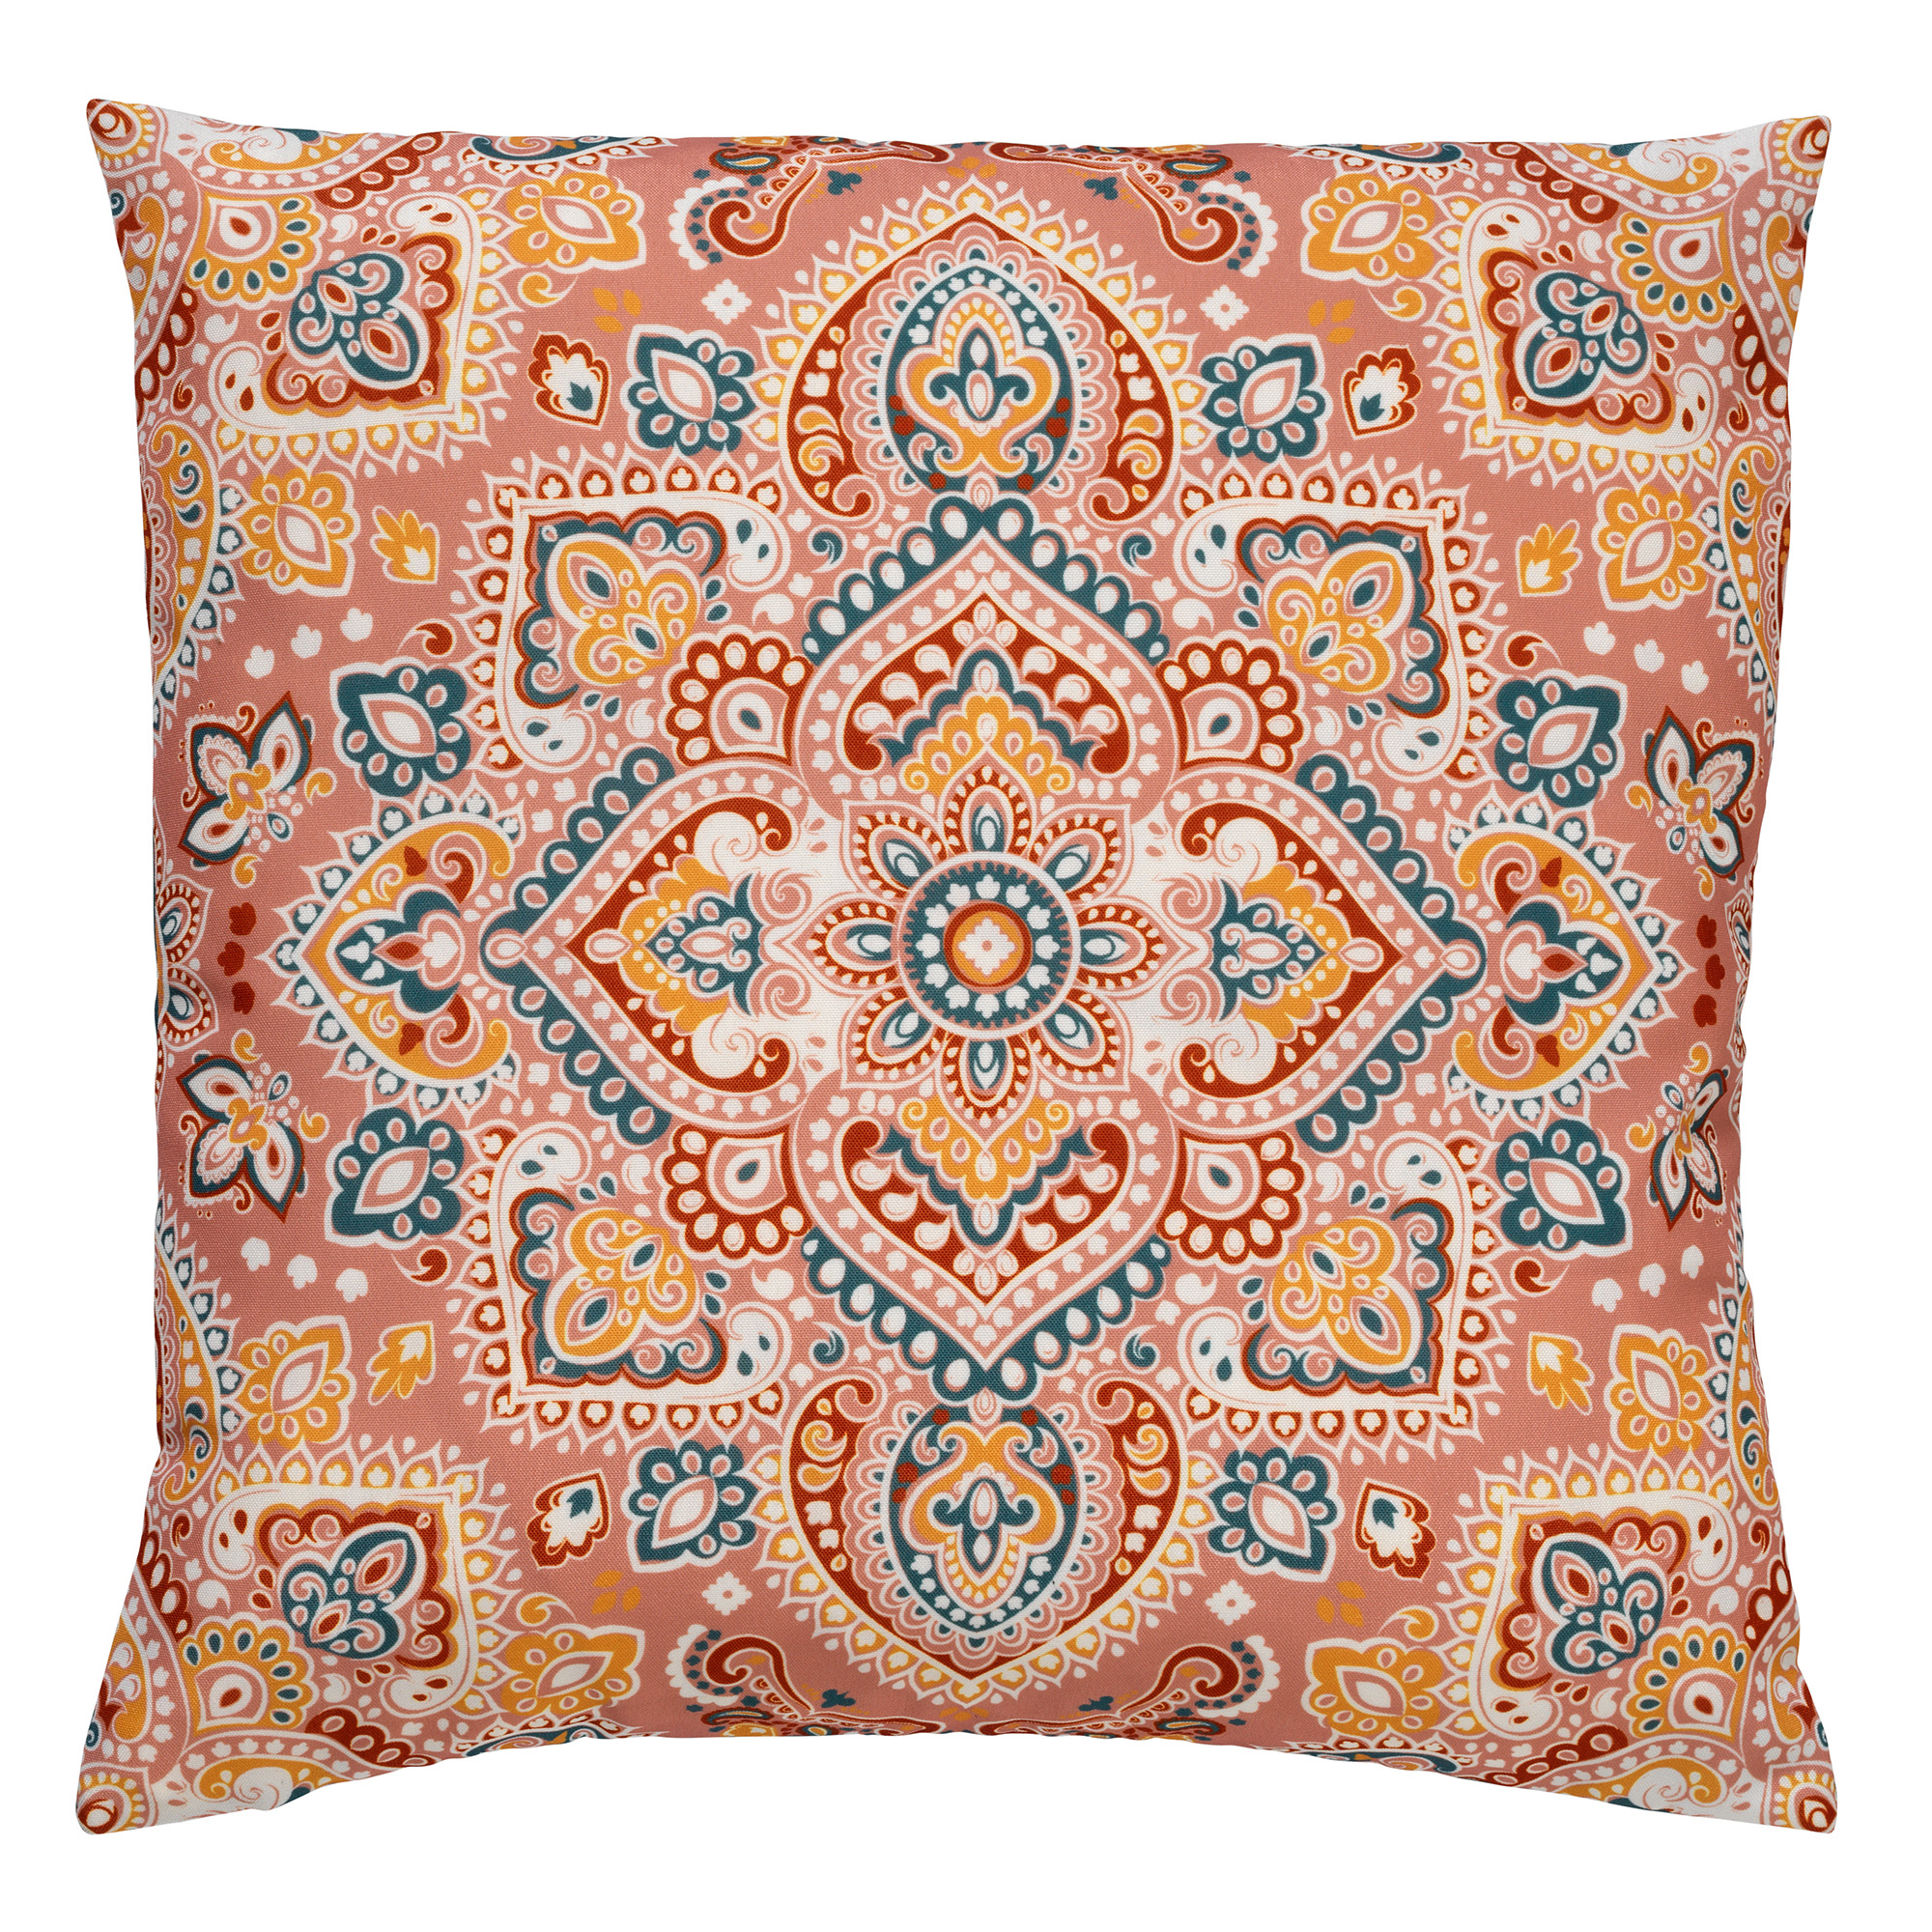 SARDINIE - Cushion cover outdoor 45x45 cm - Muted Clay - pink